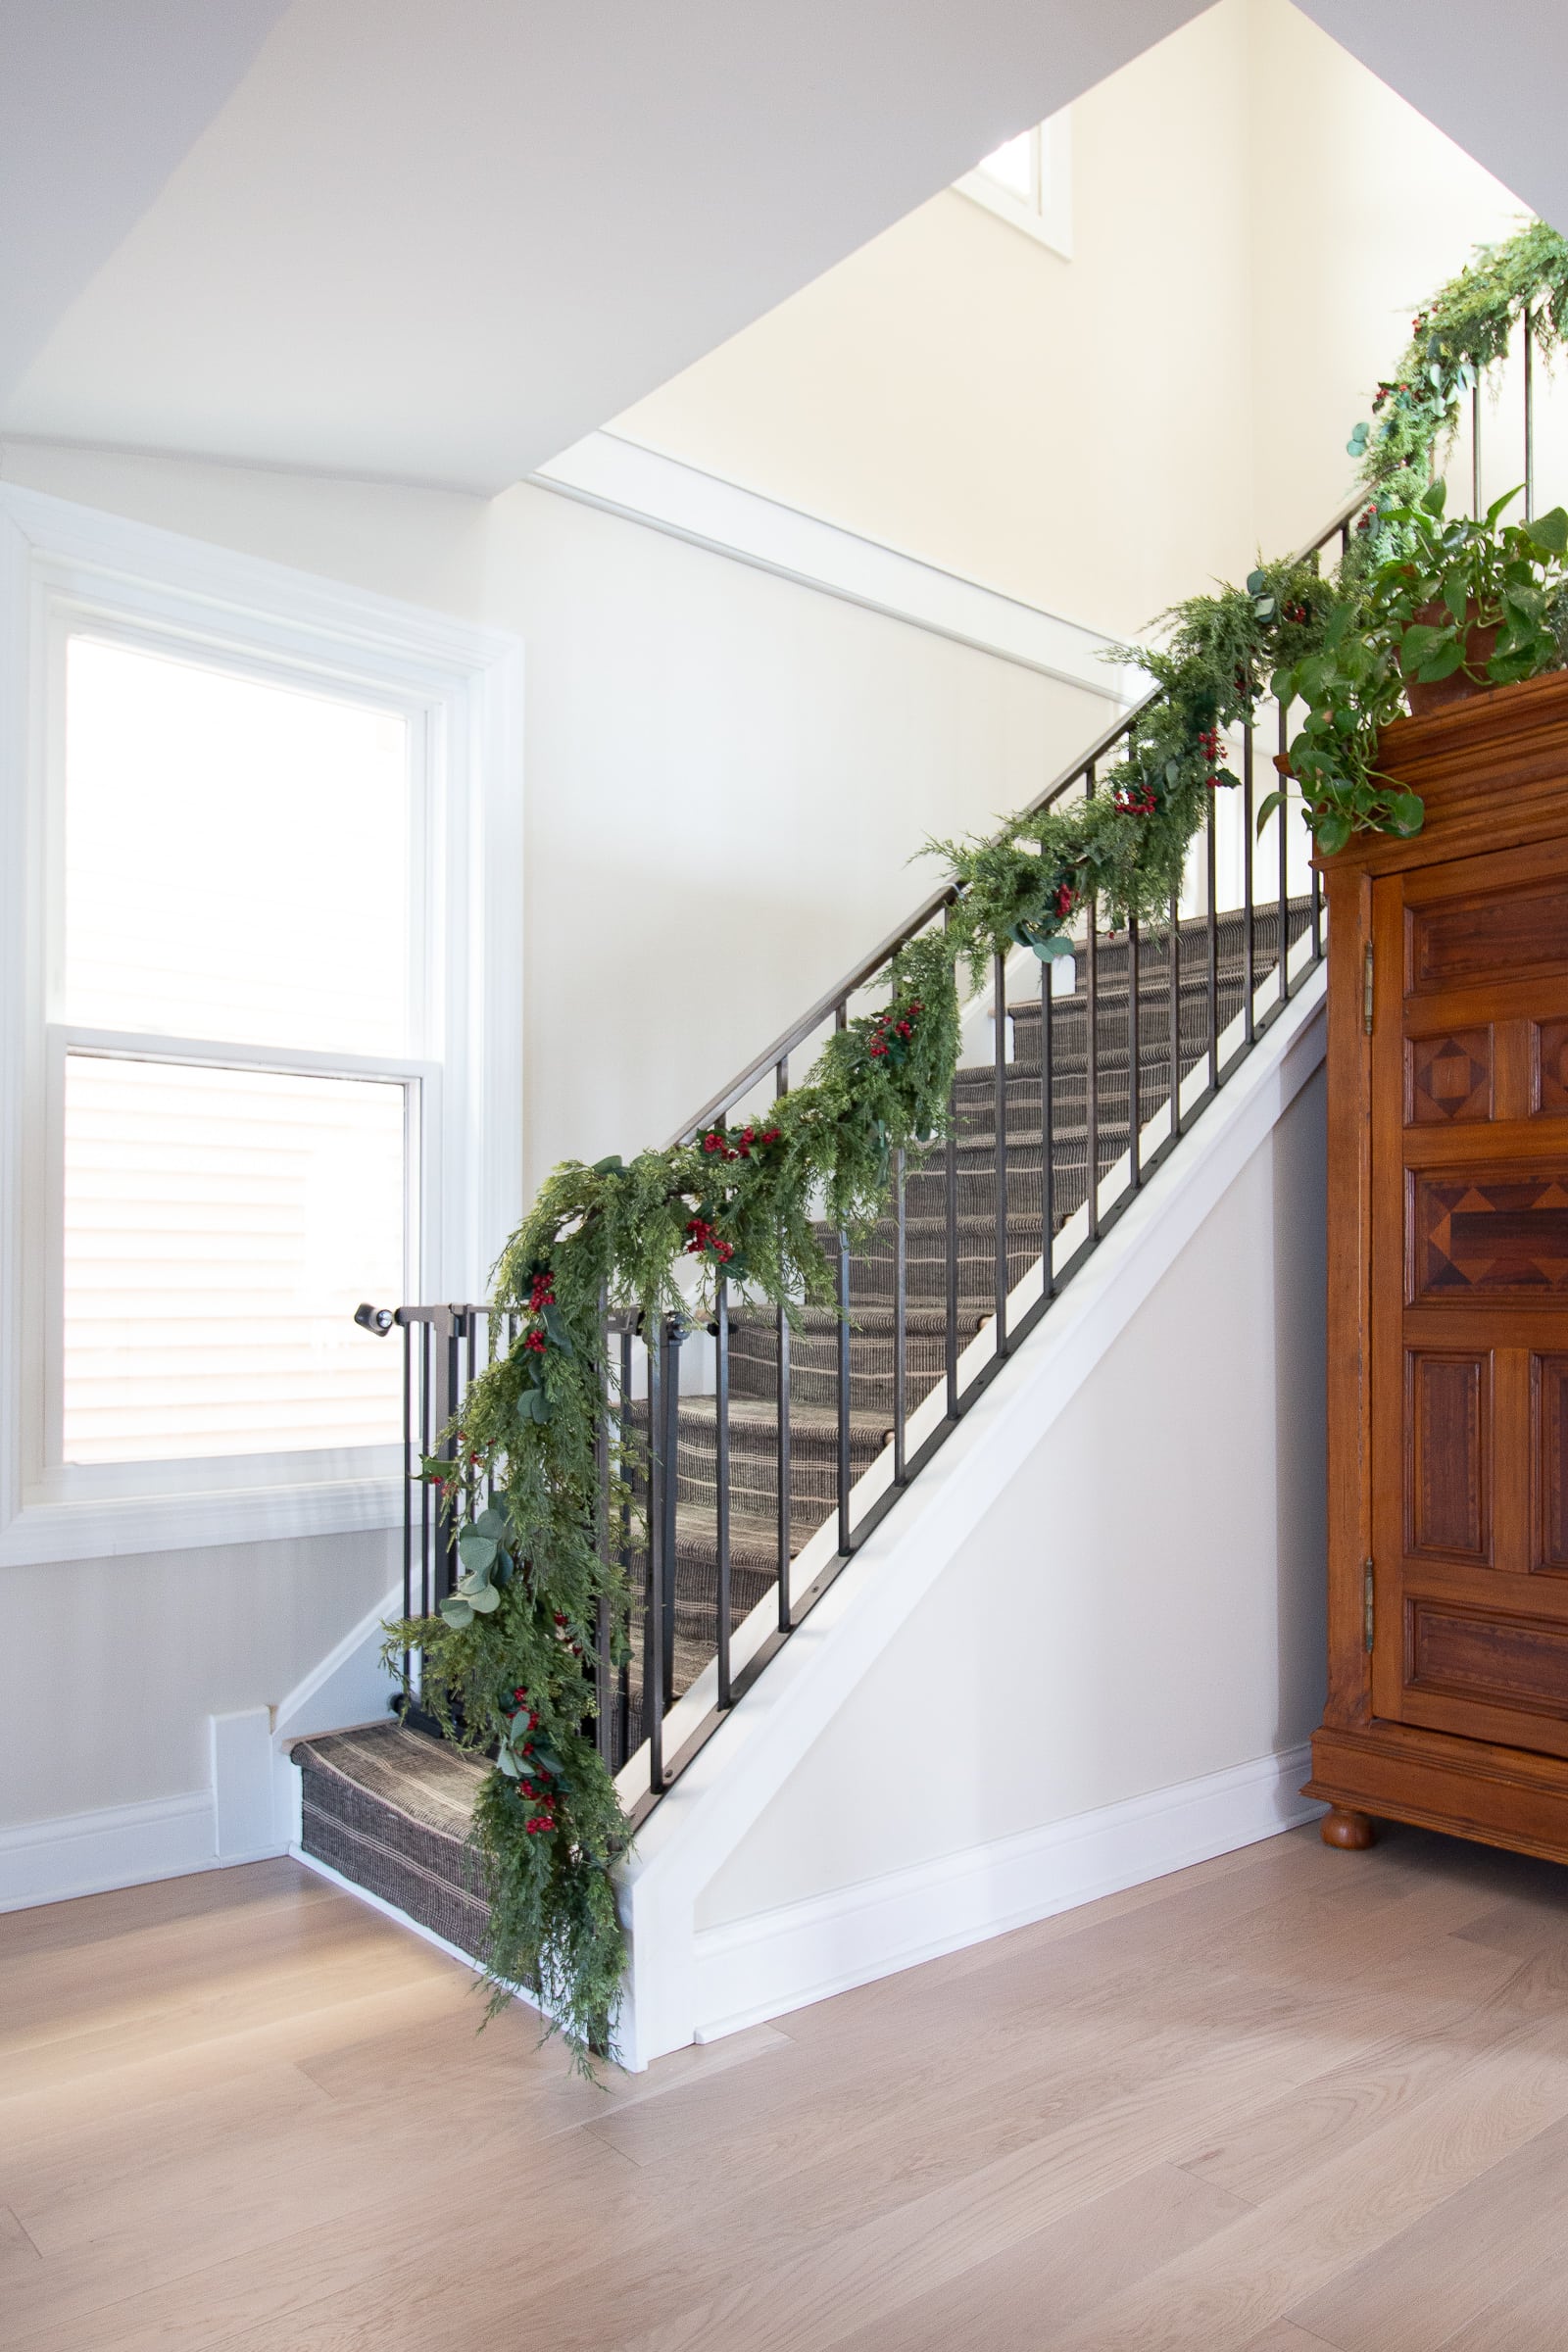 Adding garland to our holiday banister